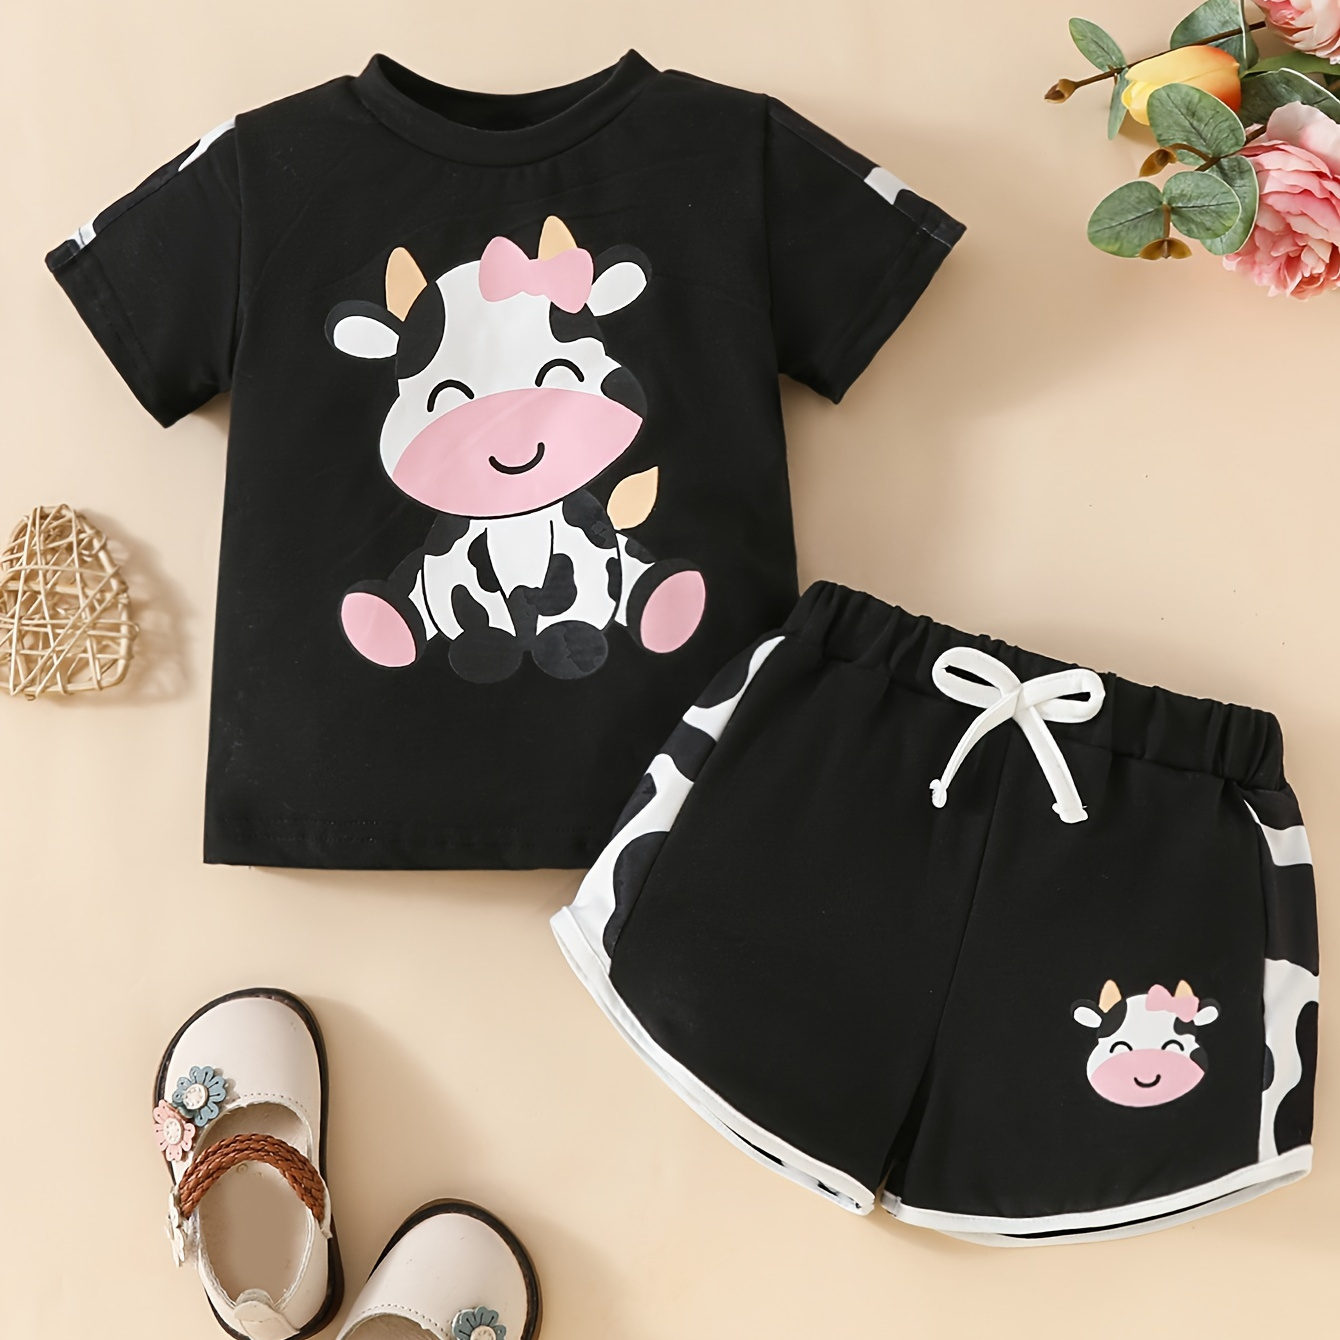 

Baby's Cartoon Happy Cow Print 2pcs Summer Outfit, T-shirt & Sporty Style Shorts Set, Toddler & Infant Girl's Clothes For Daily/holiday, As Gift